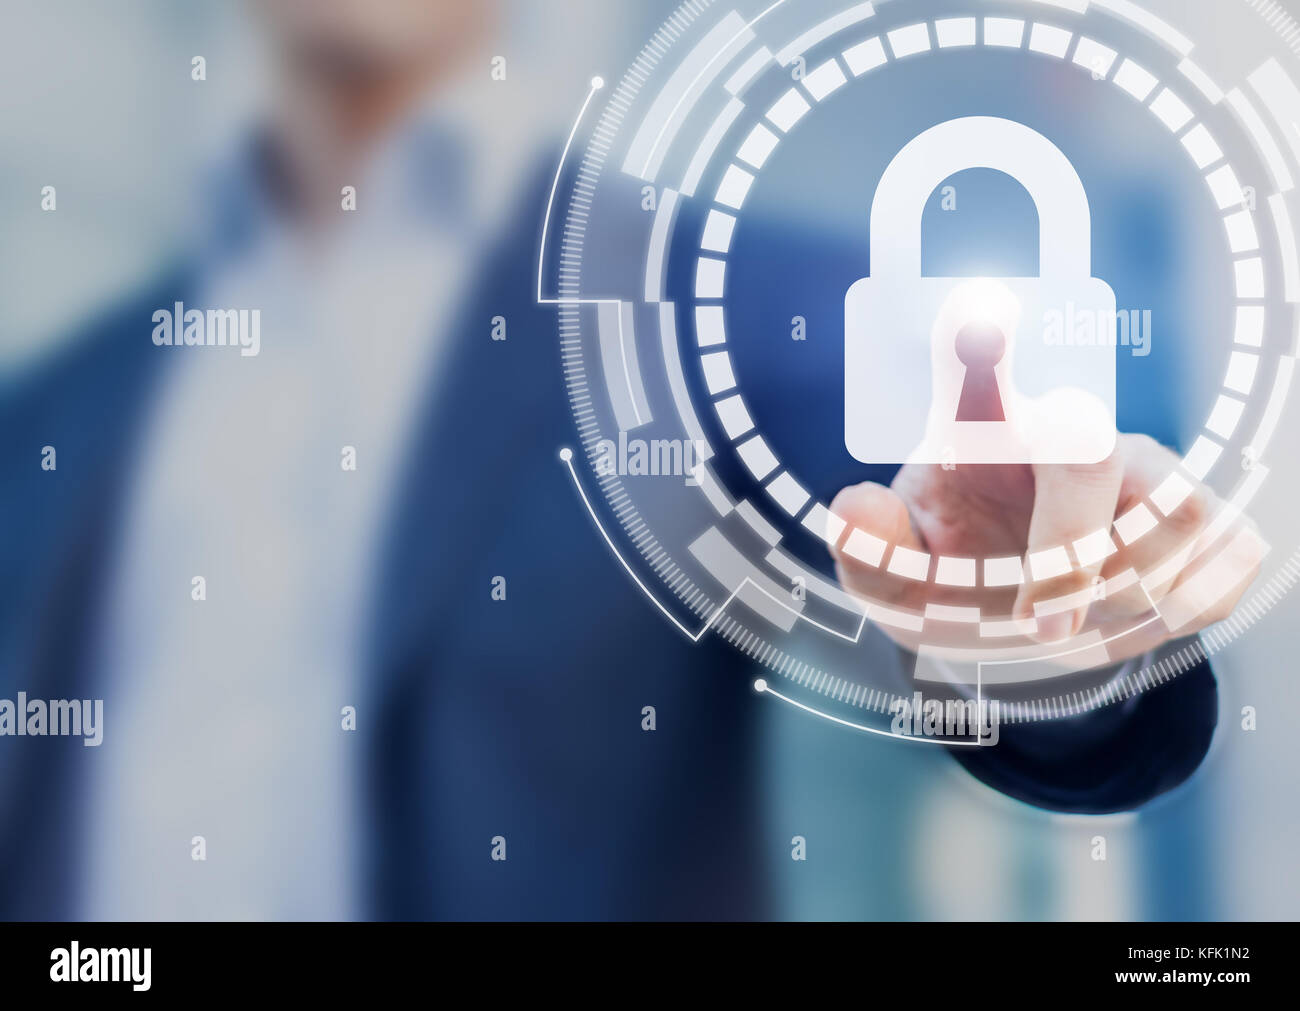 Cyber security and data privacy protection on internet concept with business user touching secure access login button with lock icon on virtual interf Stock Photo